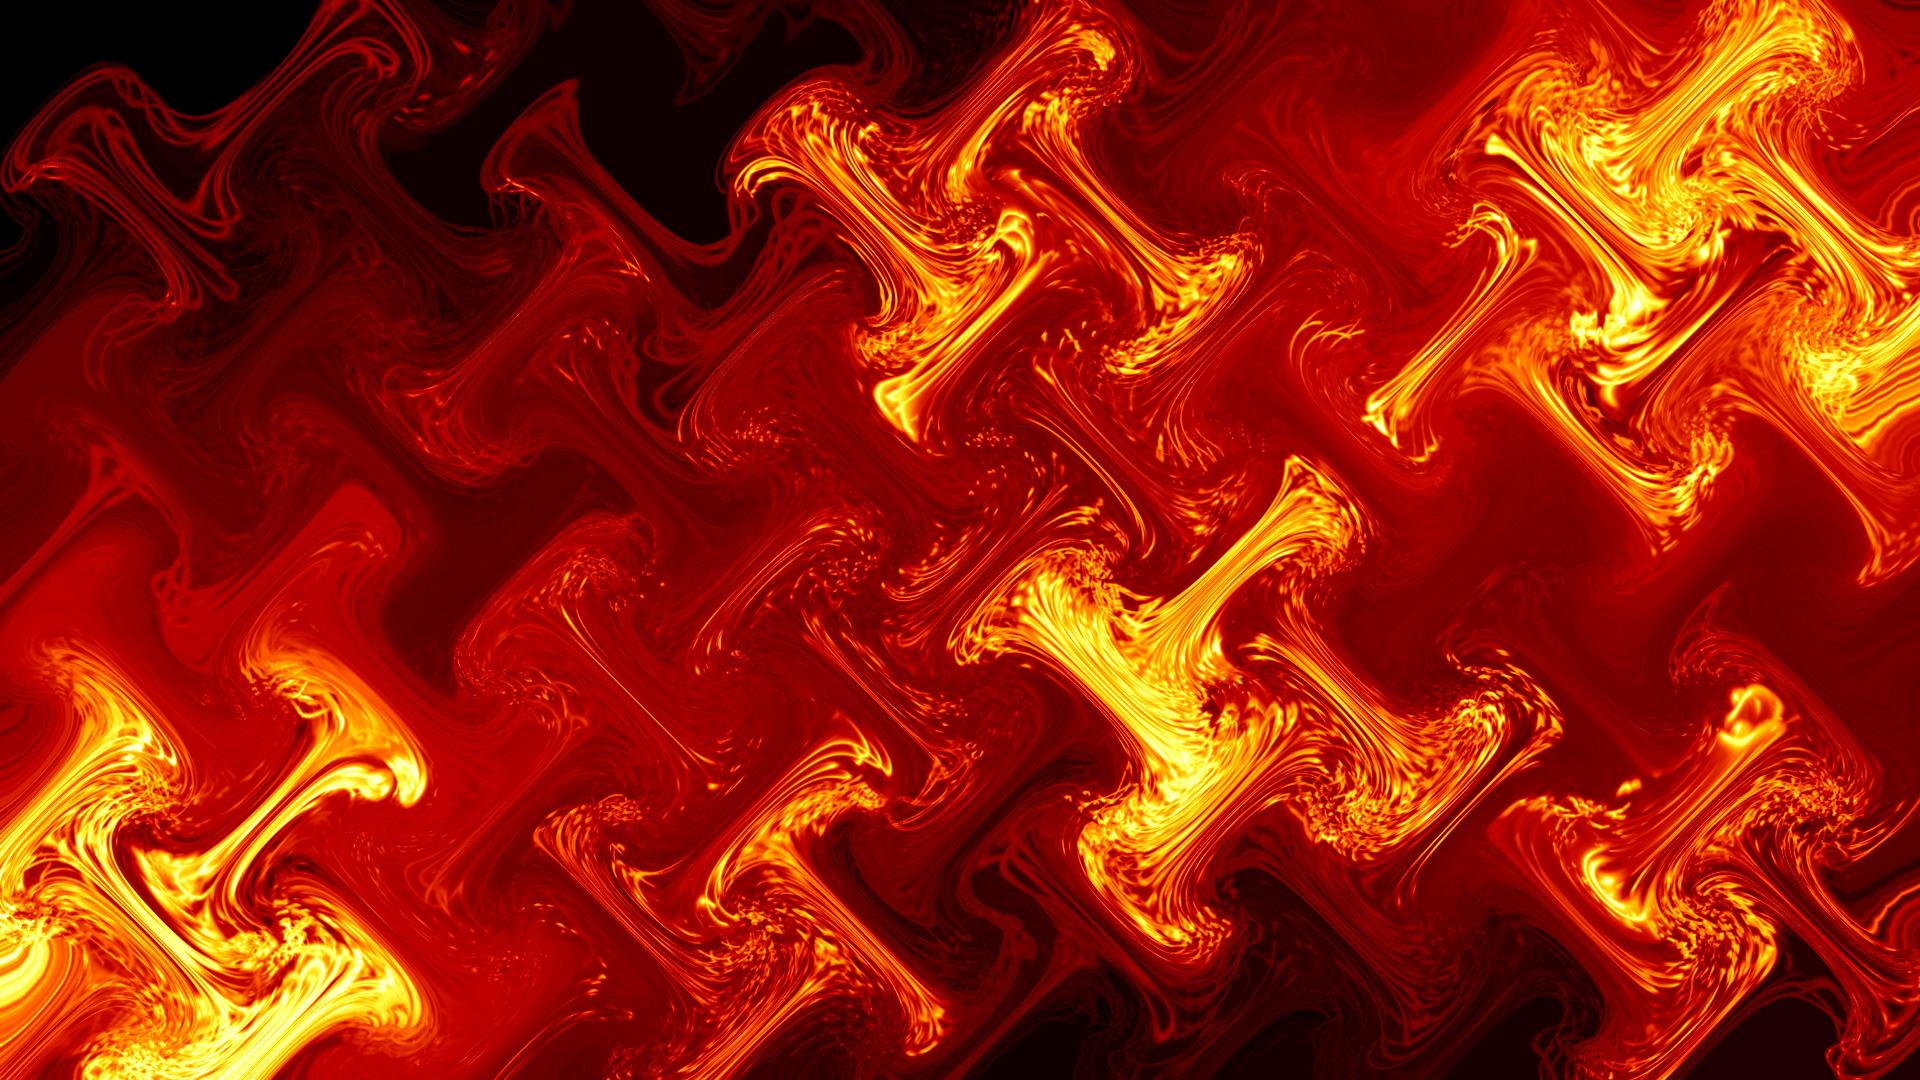 Flames wallpapers 34 flames images and wallpapers for macbook pro